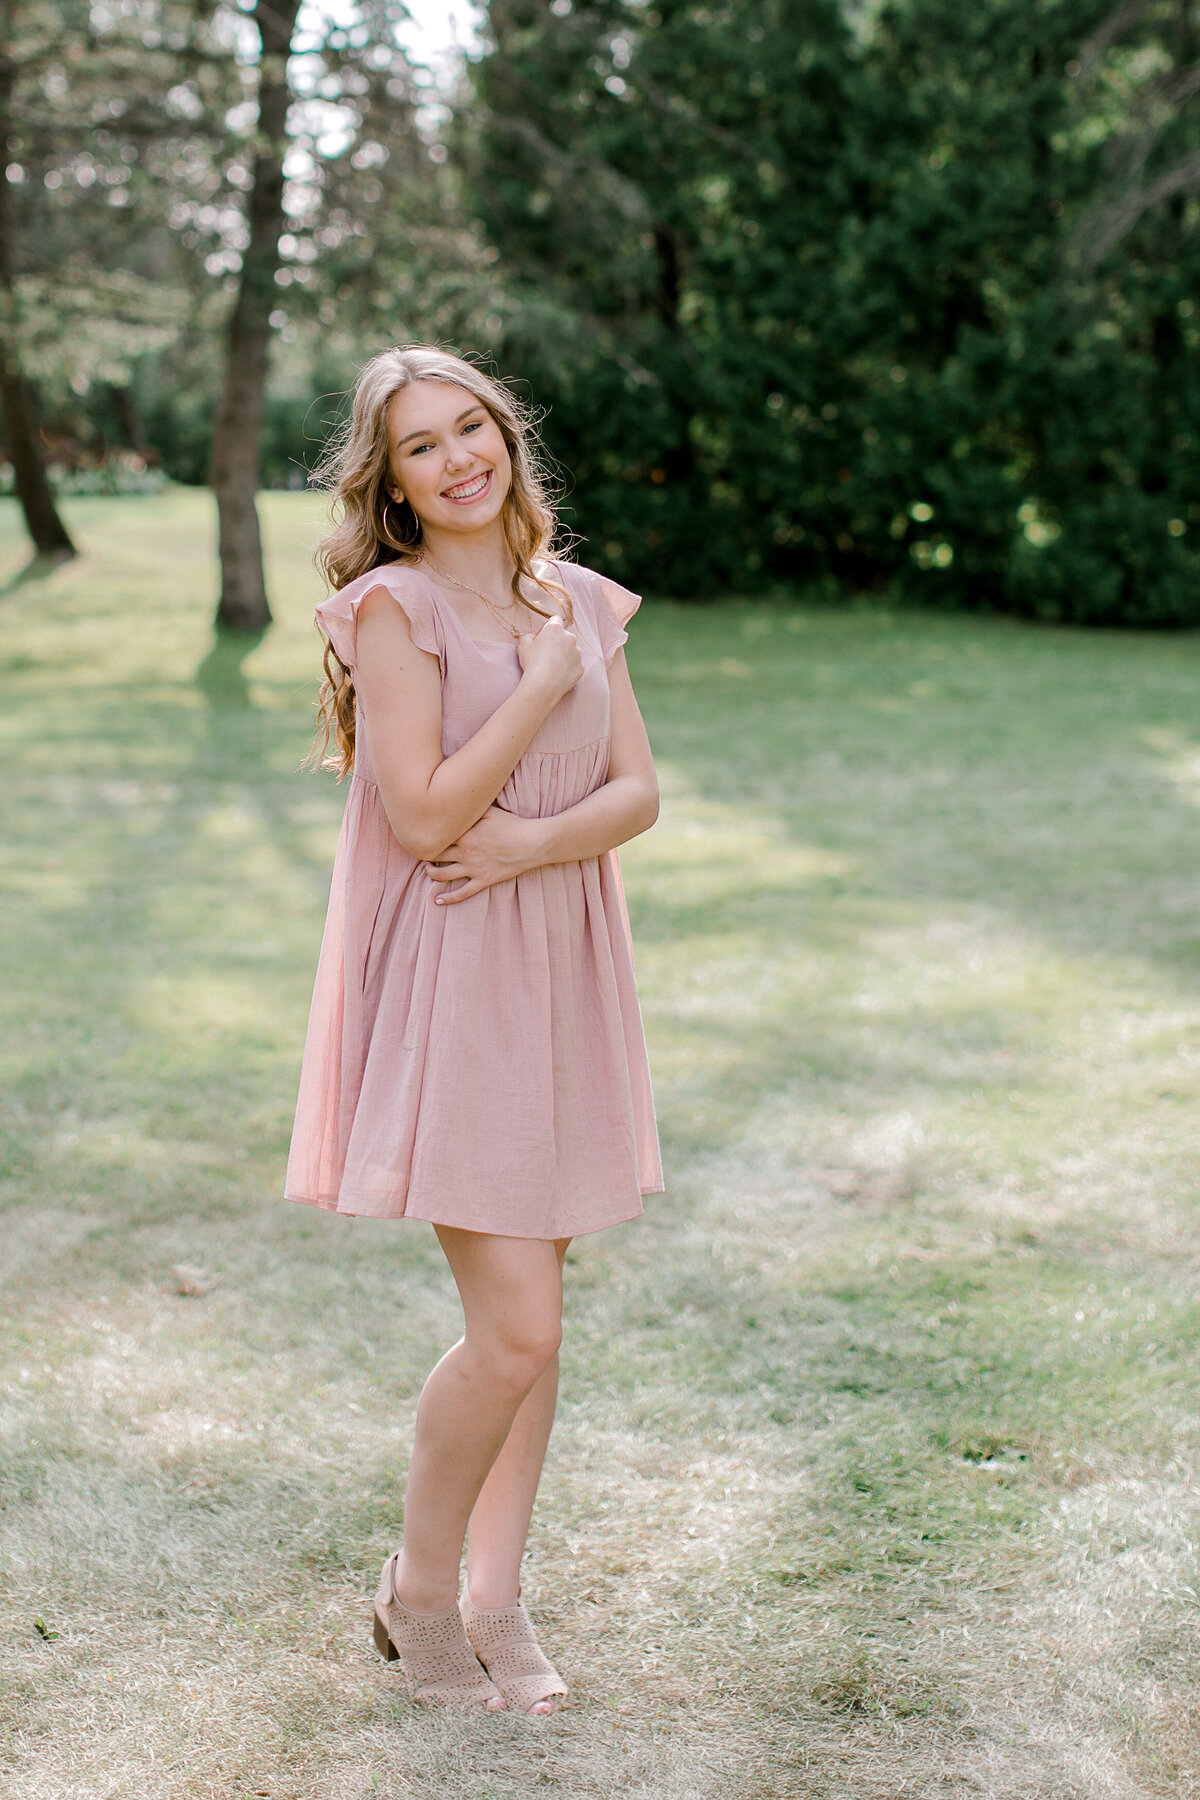 Forest Lake high school senior smiling in pink dress